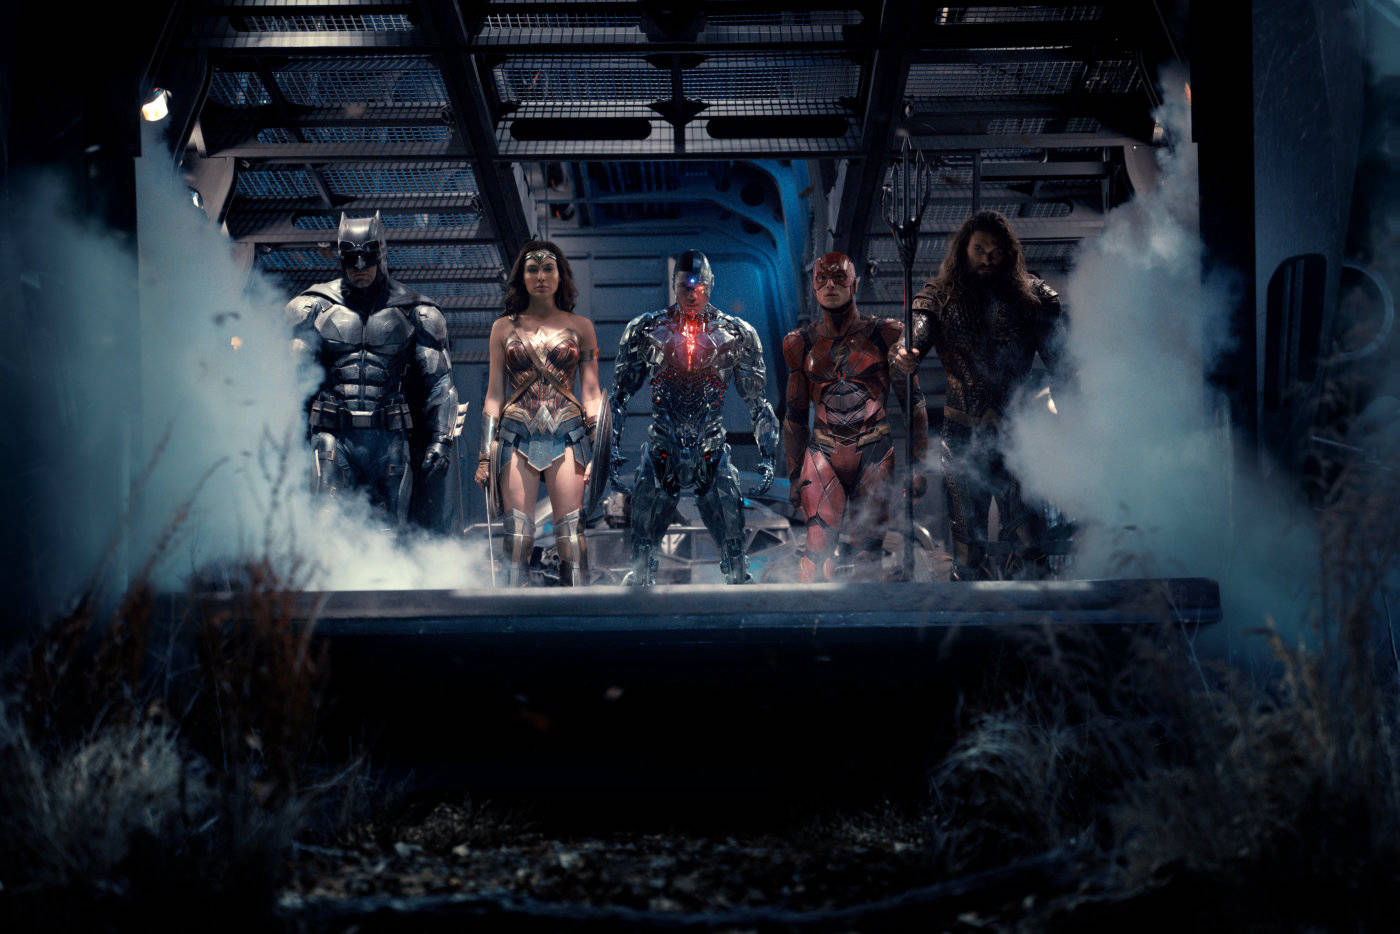 Shot from the film Justice League